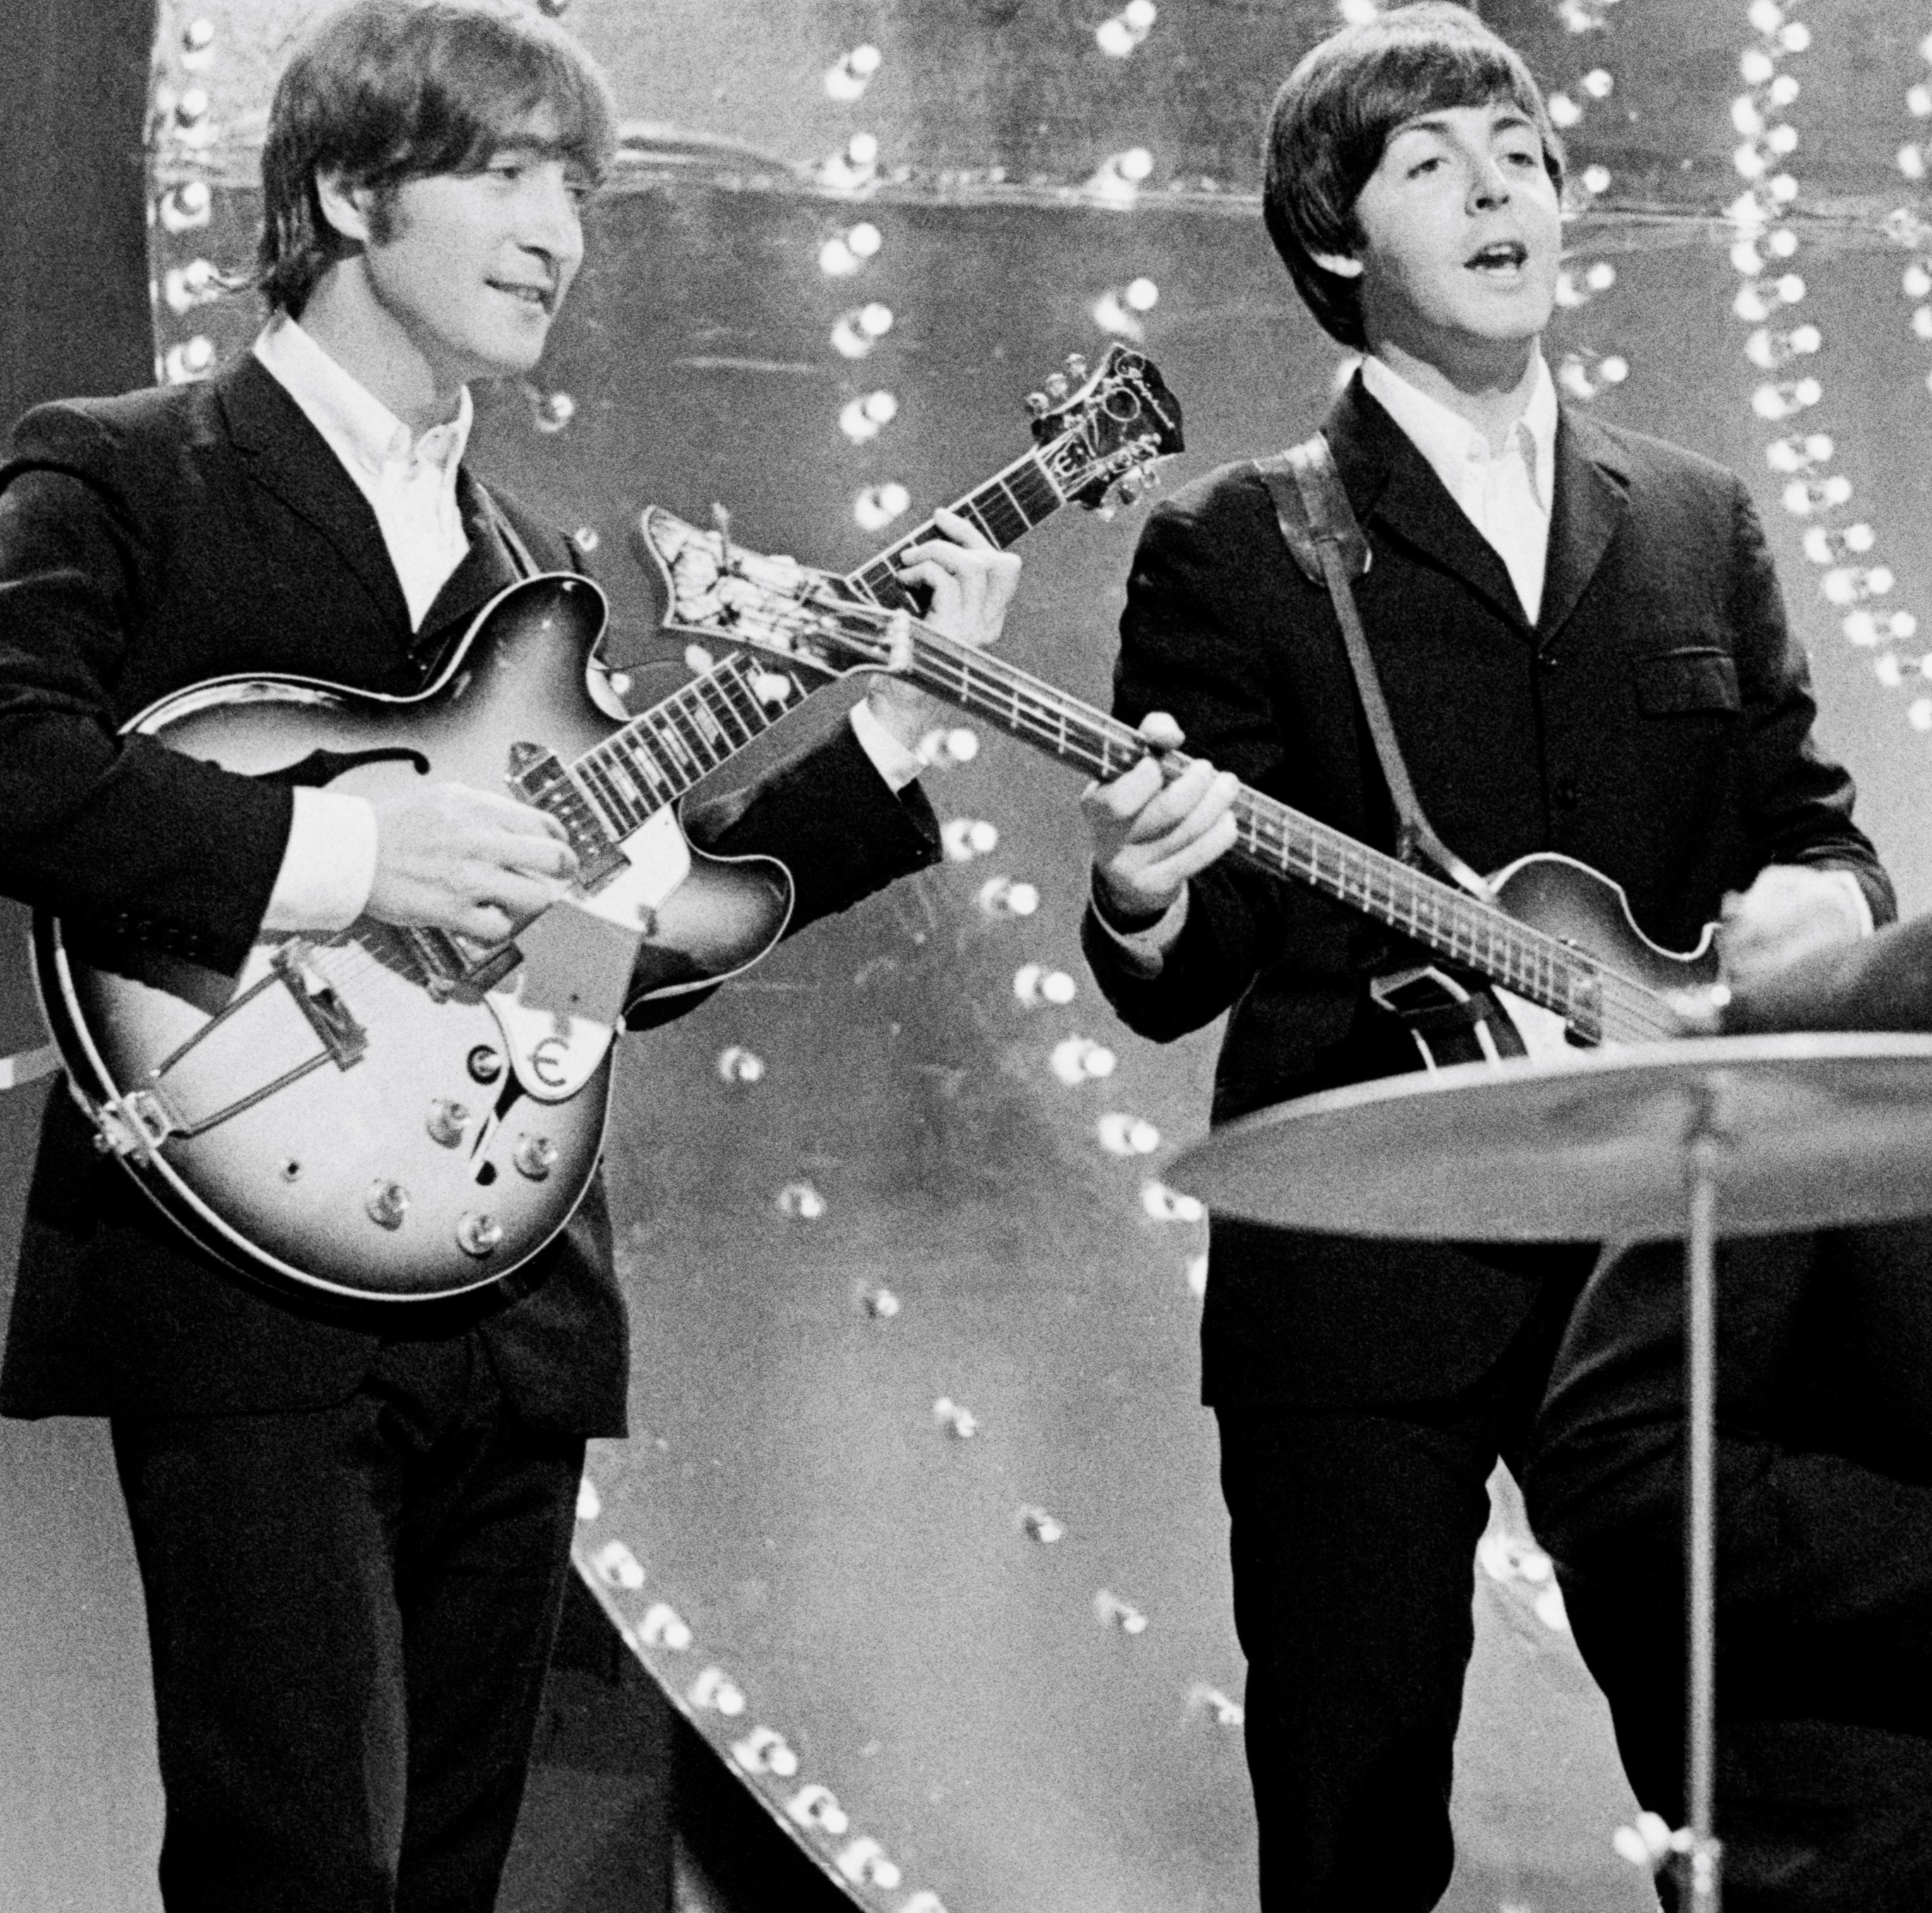 John Lennon Said a Beatles Hit Was 1 of the 1st Heavy Metal Songs